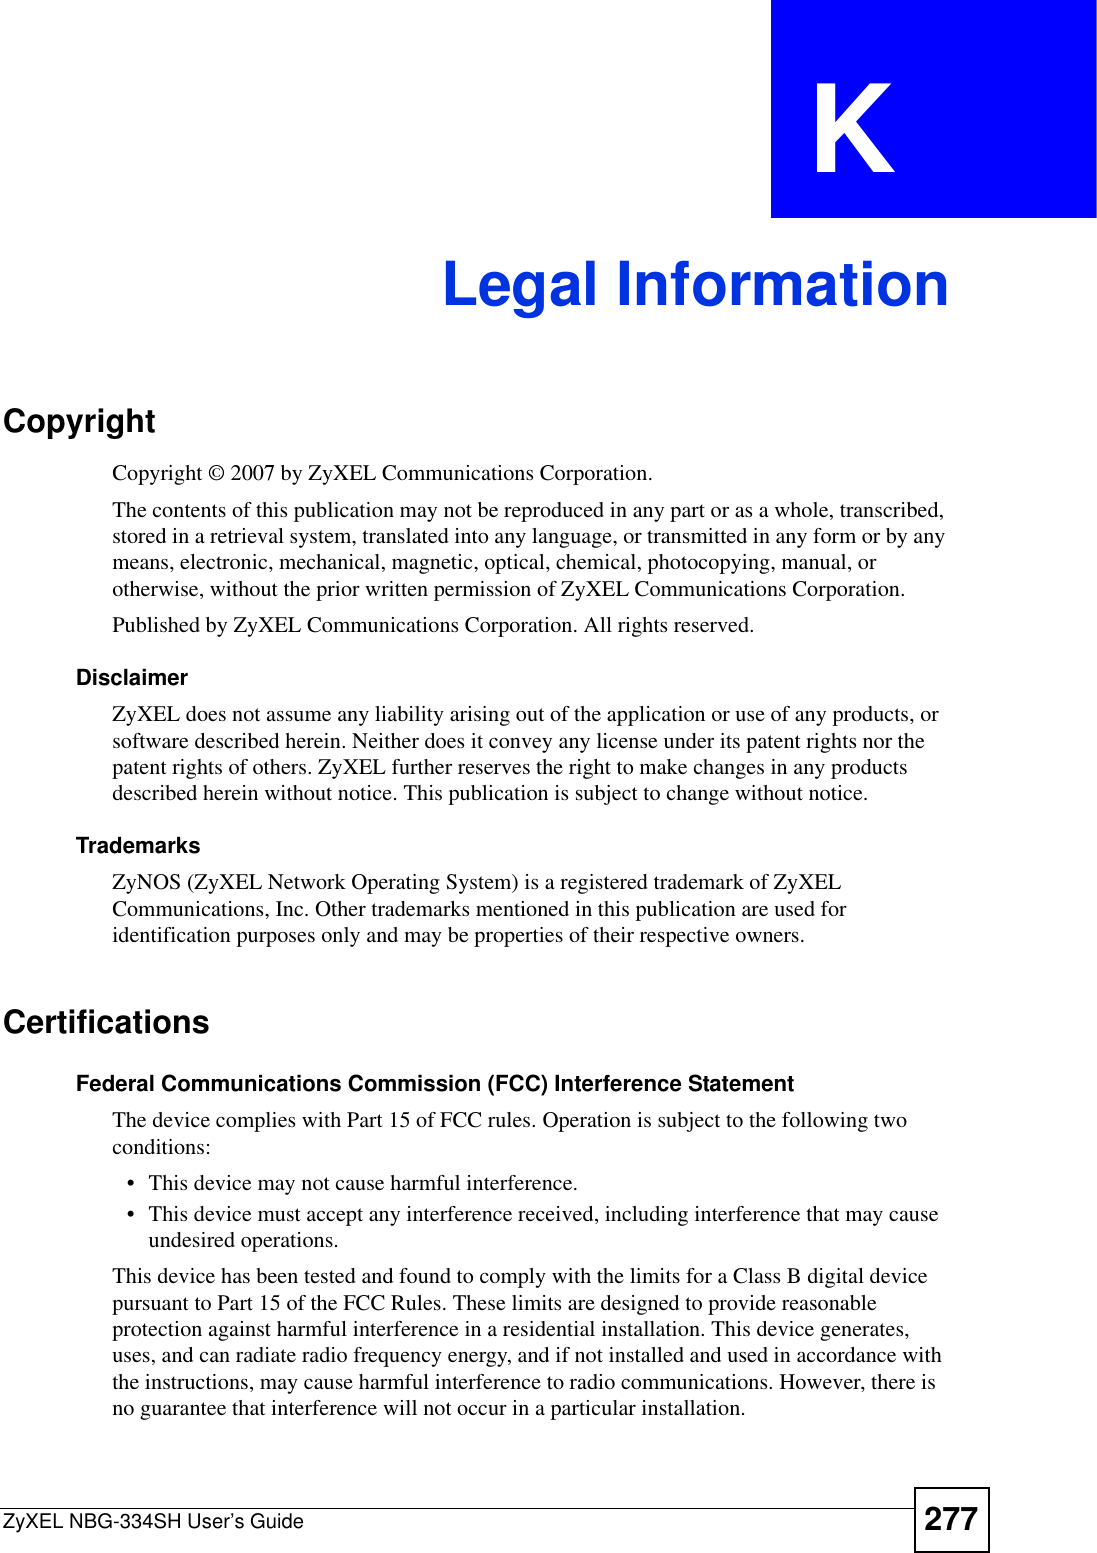 ZyXEL NBG-334SH User’s Guide 277APPENDIX  K Legal InformationCopyrightCopyright © 2007by ZyXEL Communications Corporation.The contents of this publication may not be reproduced in any part or as a whole, transcribed, stored in a retrieval system, translated into any language, or transmitted in any form or by any means, electronic, mechanical, magnetic, optical, chemical, photocopying, manual, or otherwise, without the prior written permission of ZyXEL Communications Corporation.Published by ZyXEL Communications Corporation. All rights reserved.DisclaimerZyXEL does not assume any liability arising out of the application or use of any products, or software described herein. Neither does it convey any license under its patent rights nor the patent rights of others. ZyXEL further reserves the right to make changes in any products described herein without notice. This publication is subject to change without notice.TrademarksZyNOS (ZyXEL Network Operating System) is a registered trademark of ZyXEL Communications, Inc. Other trademarks mentioned in this publication are used for identification purposes only and may be properties of their respective owners.CertificationsFederal Communications Commission (FCC) Interference StatementThe device complies with Part 15 of FCC rules. Operation is subject to the following two conditions:• This device may not cause harmful interference.• This device must accept any interference received, including interference that may cause undesired operations.This device has been tested and found to comply with the limits for a Class B digital device pursuant to Part 15 of the FCC Rules. These limits are designed to provide reasonable protection against harmful interference in a residential installation. This device generates, uses, and can radiate radio frequency energy, and if not installed and used in accordance with the instructions, may cause harmful interference to radio communications. However, there is no guarantee that interference will not occur in a particular installation.